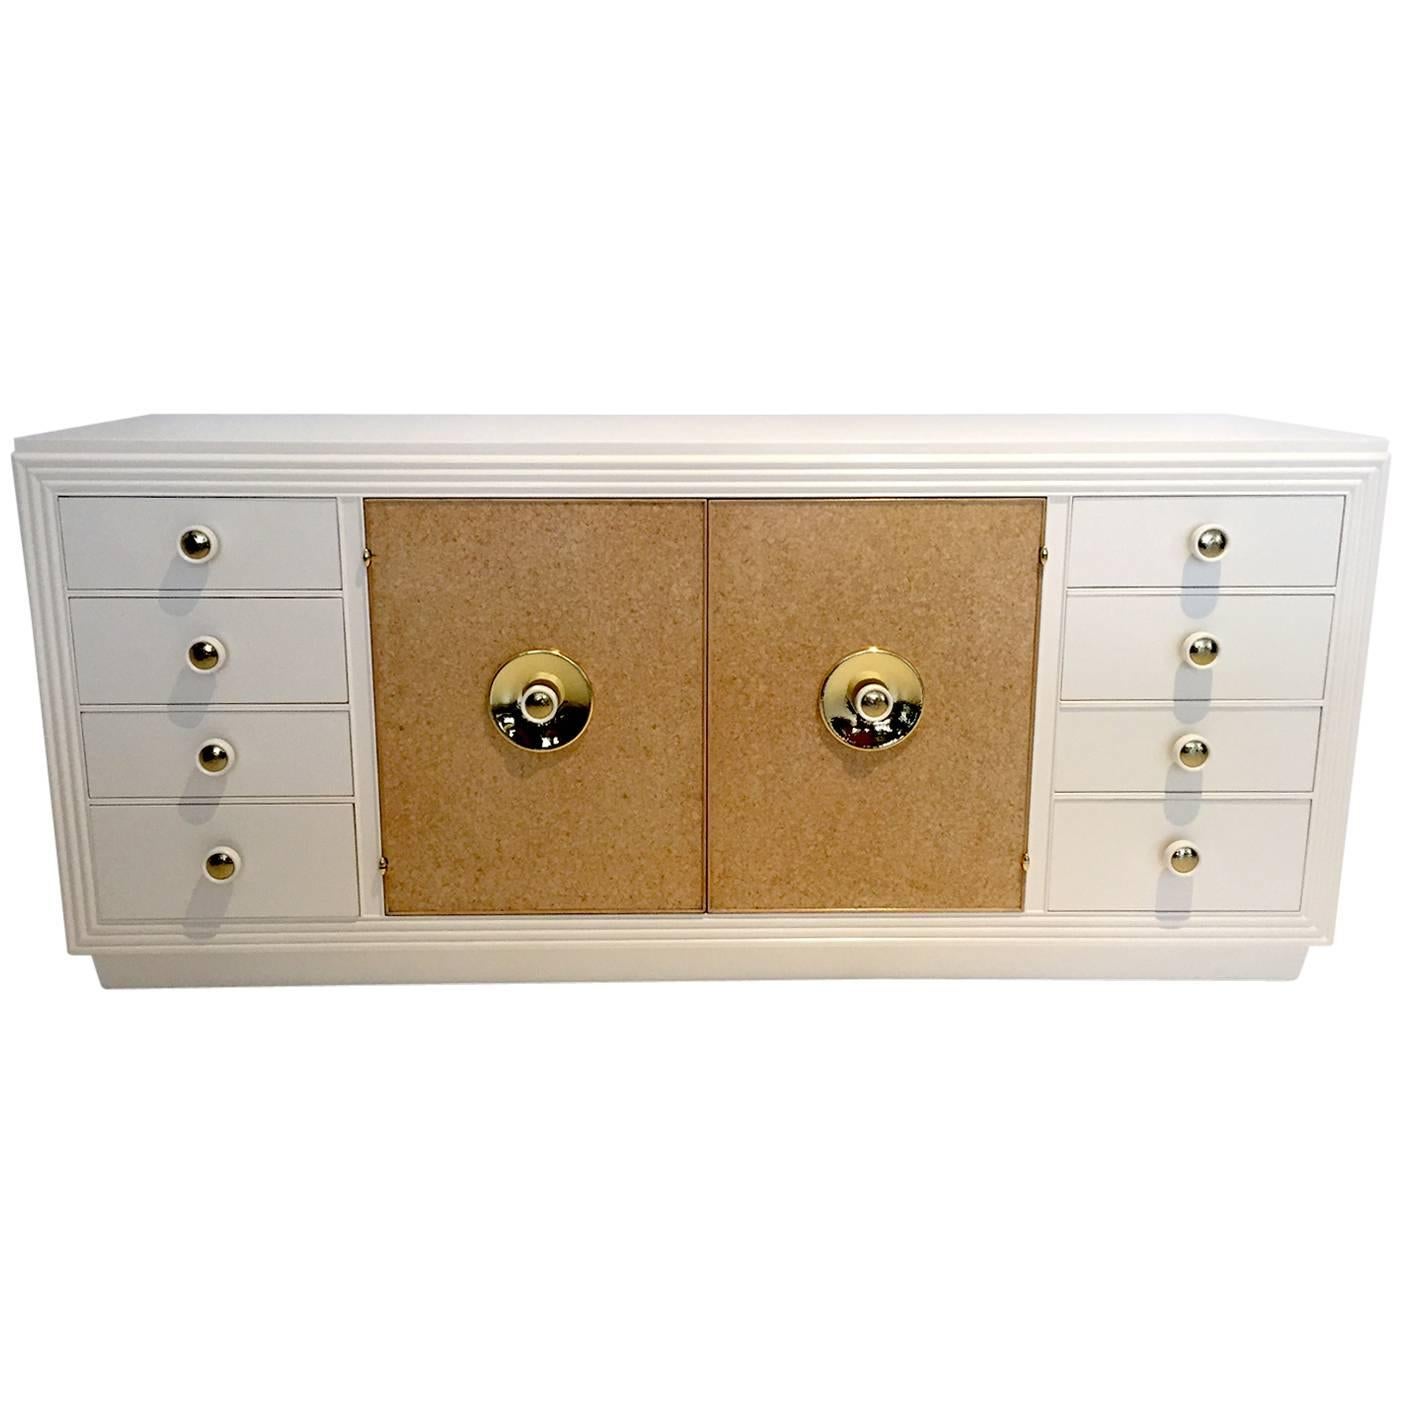 Paul Frankl Sideboard with Lacquered Cork and Brass